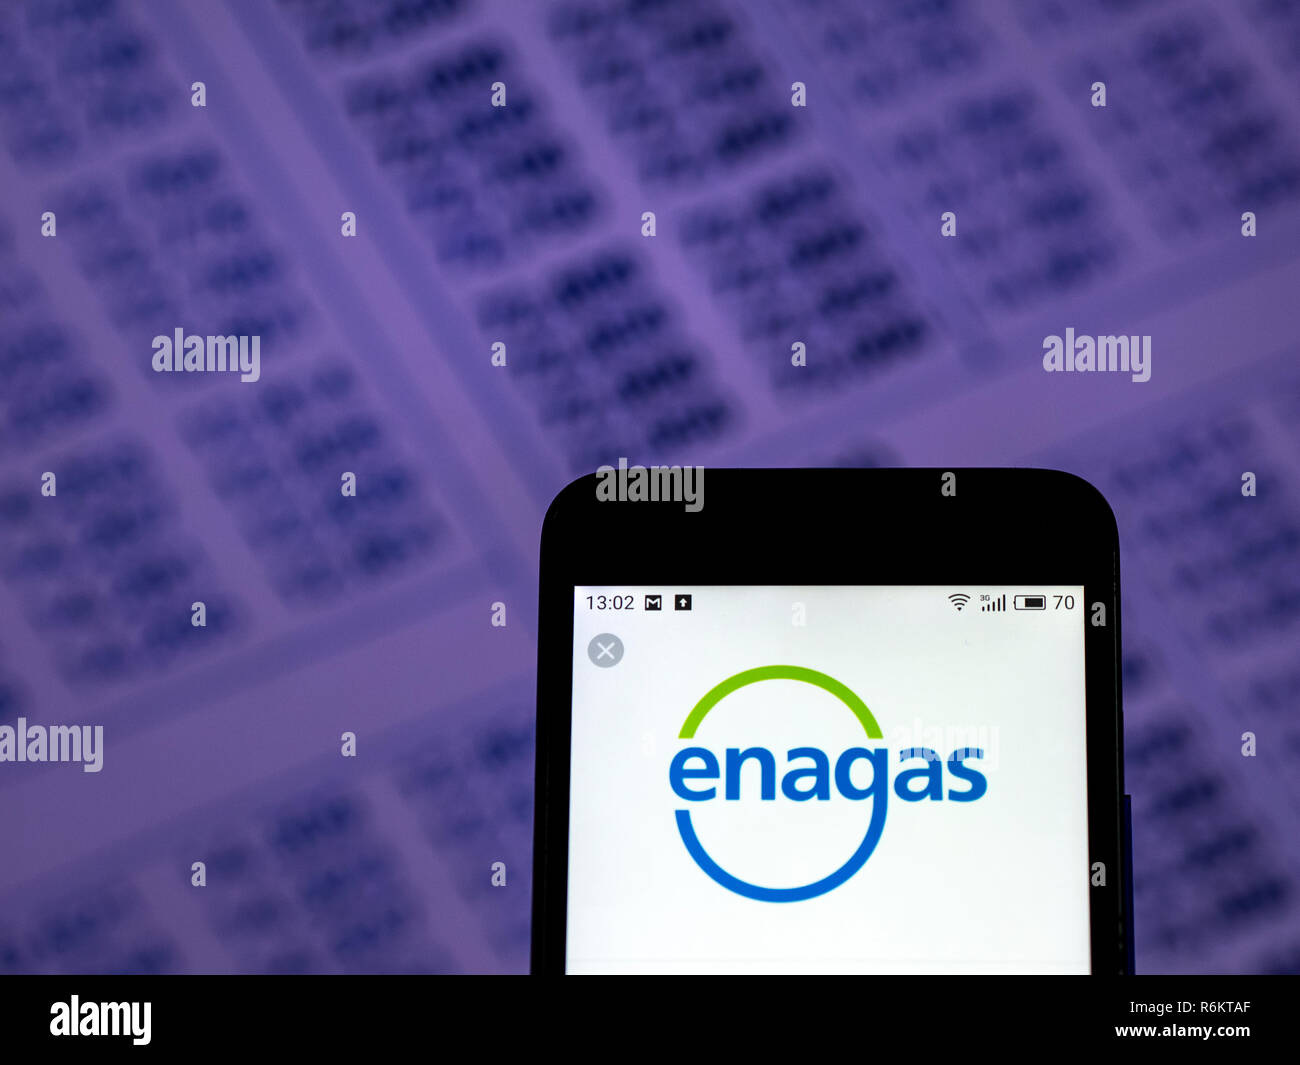 Enagas, S.A. is a Spanish energy company  logo seen displayed on smart phone. Stock Photo